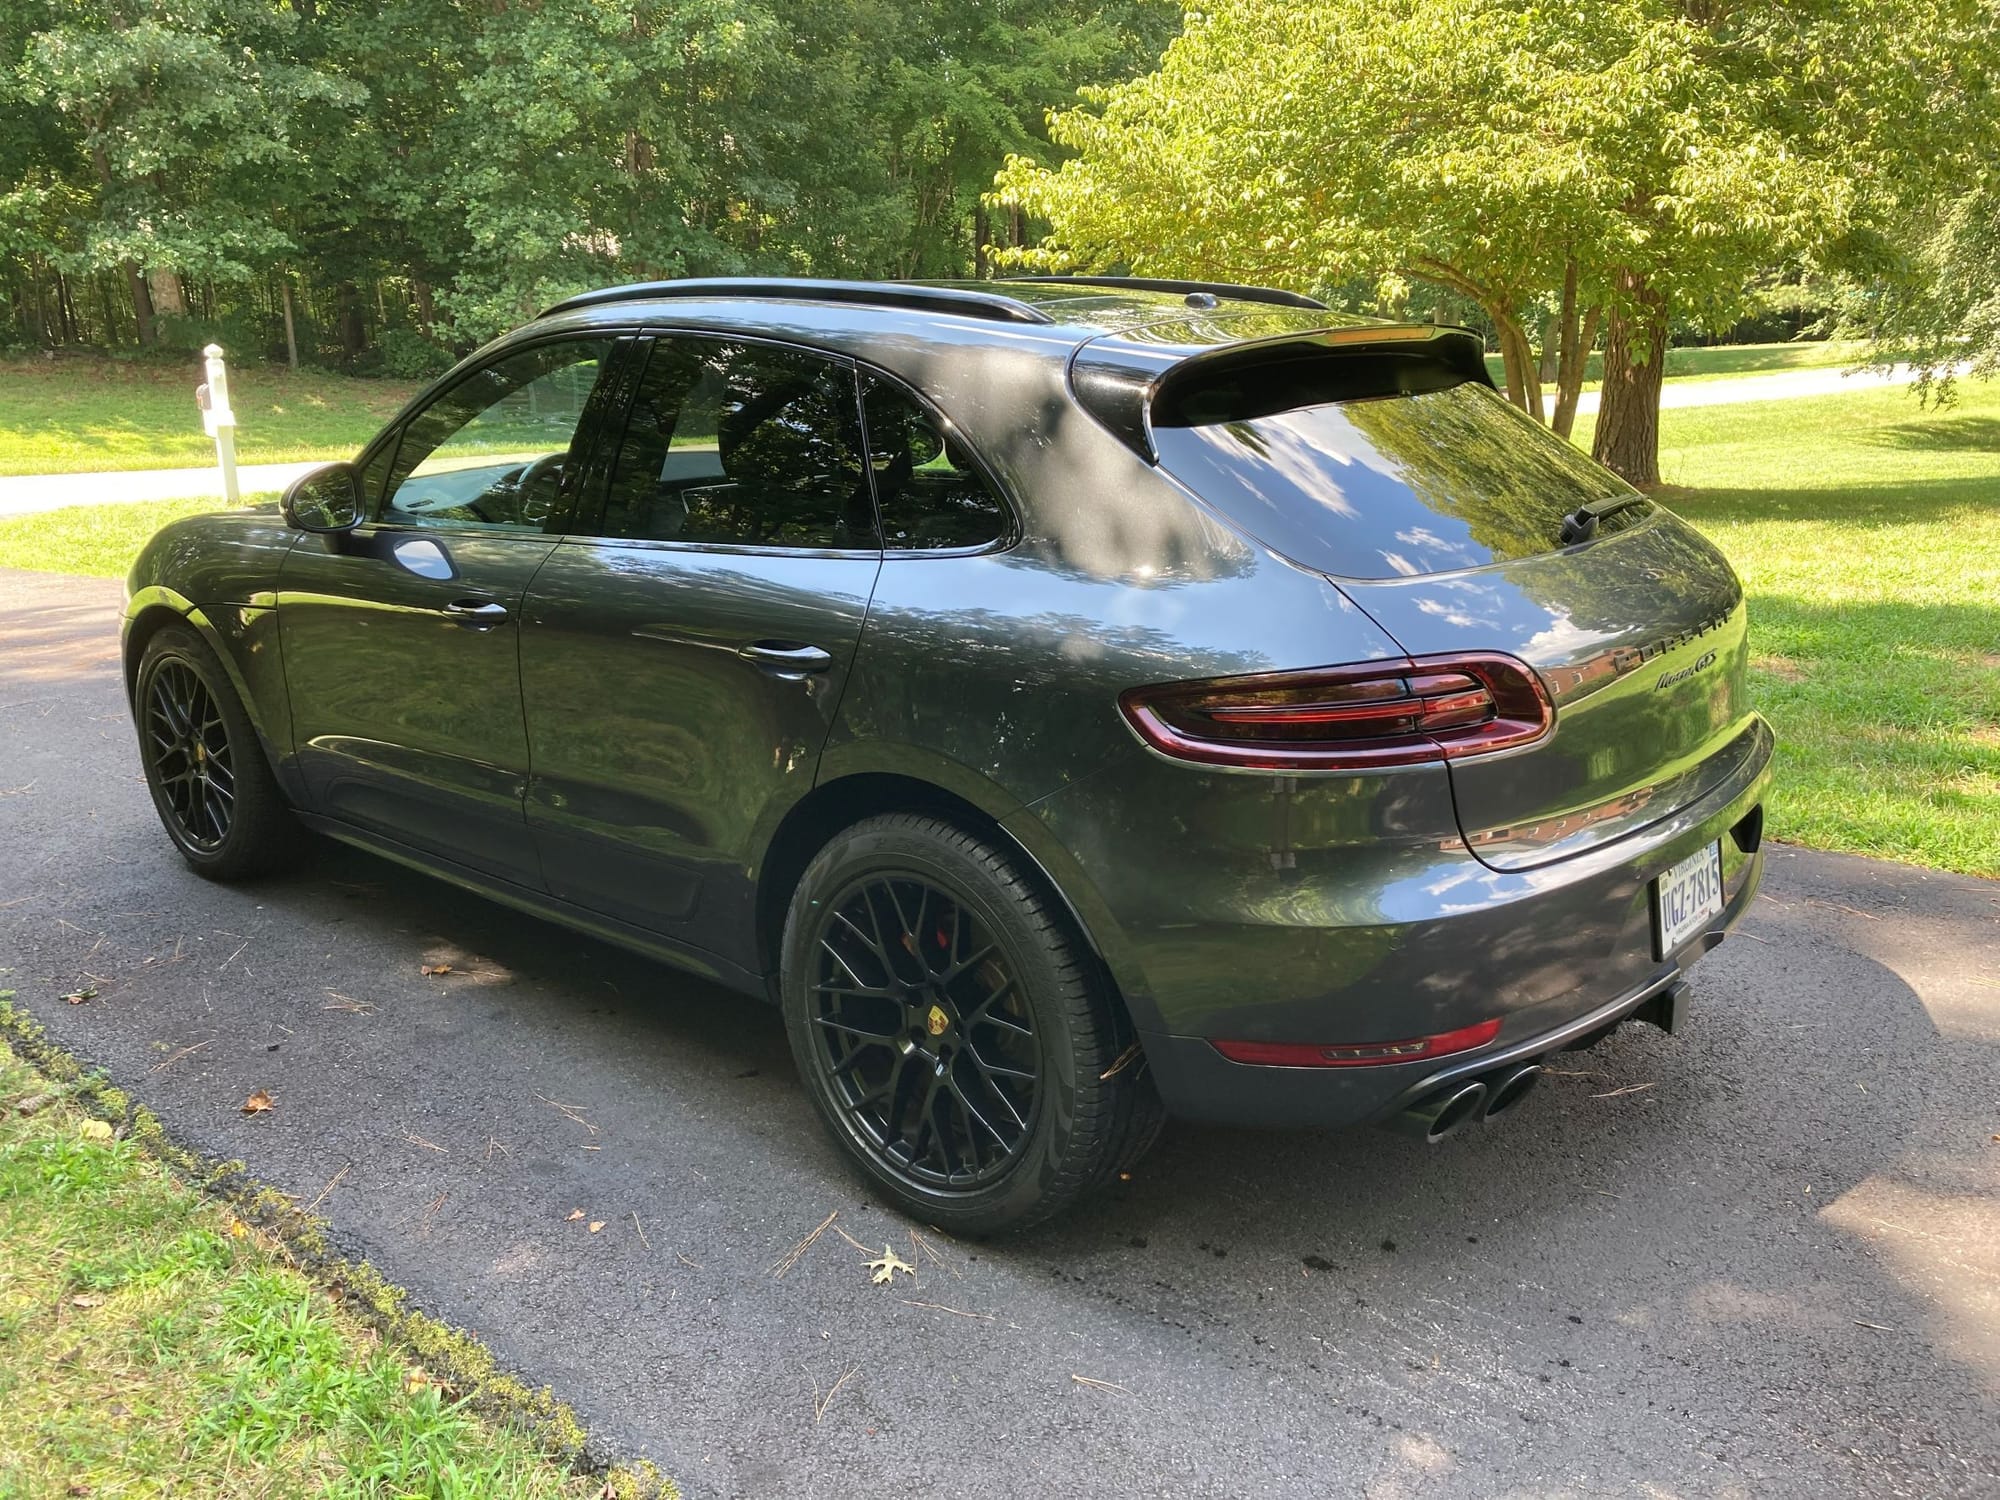 2017 Porsche Macan - FS 2017 Macan GTS CPO - Used - VIN WP1AG2A52HLB55924 - 48,500 Miles - 6 cyl - AWD - Automatic - SUV - Gray - Chesterfield, VA 23838, United States